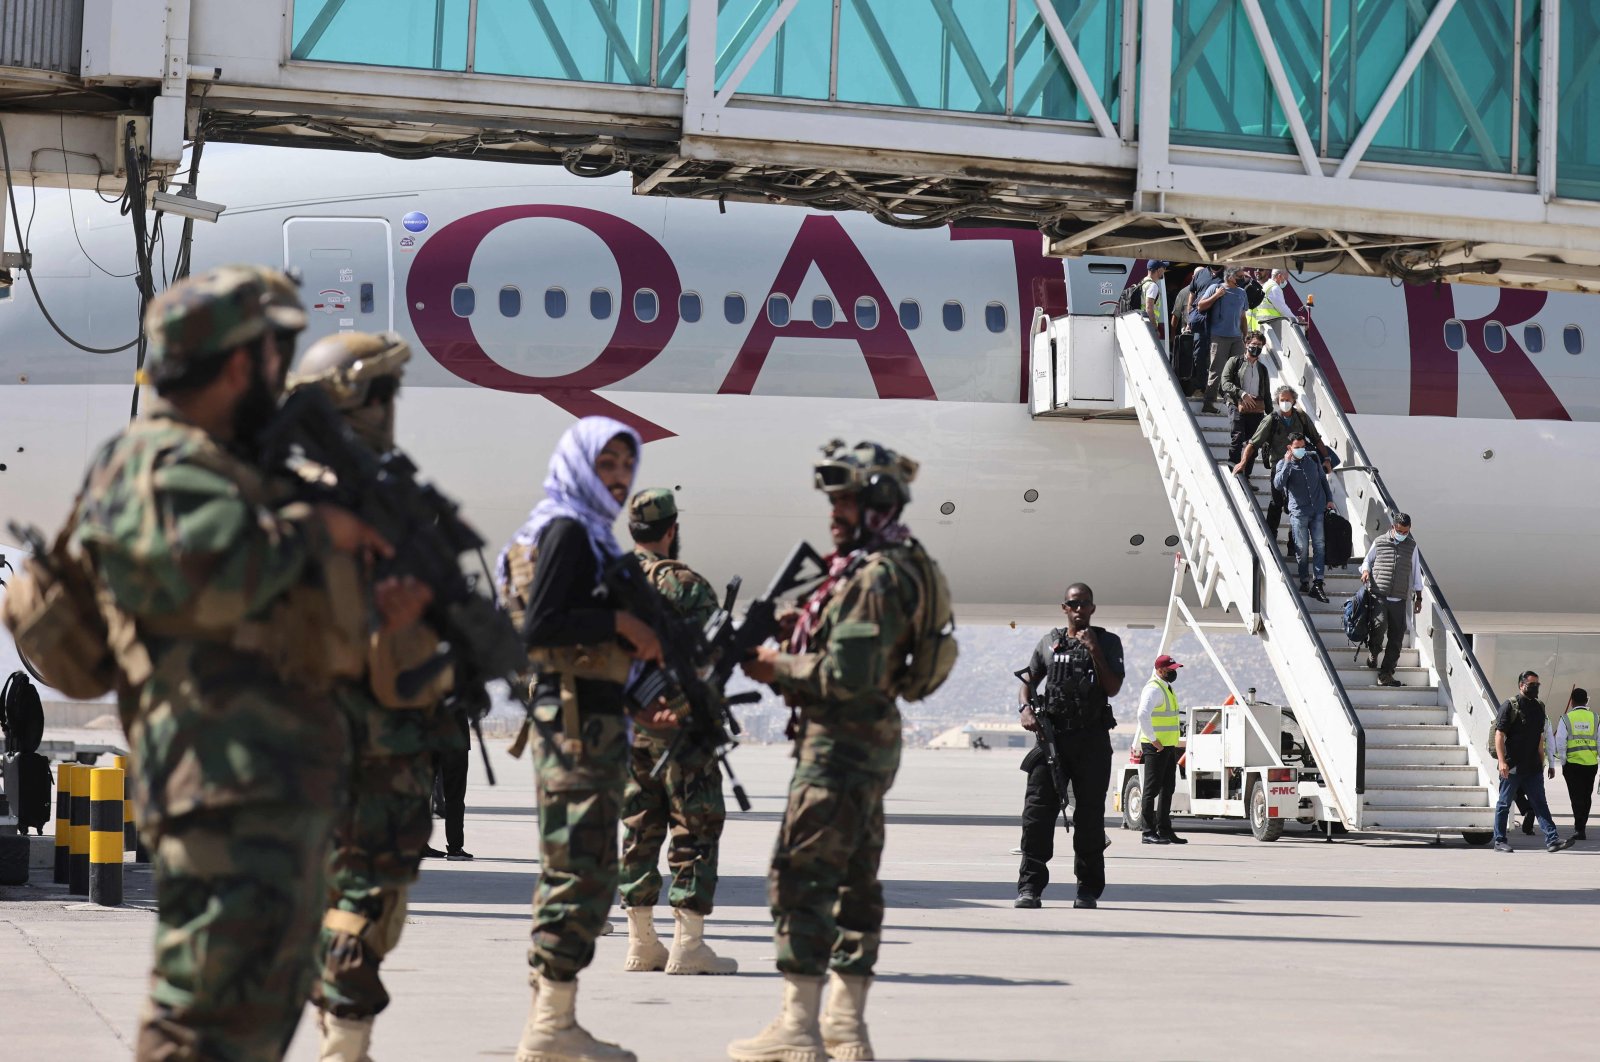 Fighters of the Taliban Badri 313 military unit stand guard as passengers on board a Qatar Airways aircraft disembark at the Kabul Hamid Karzai International Airport, Afghanistan, Sept. 14, 2021. (AFP Photo)